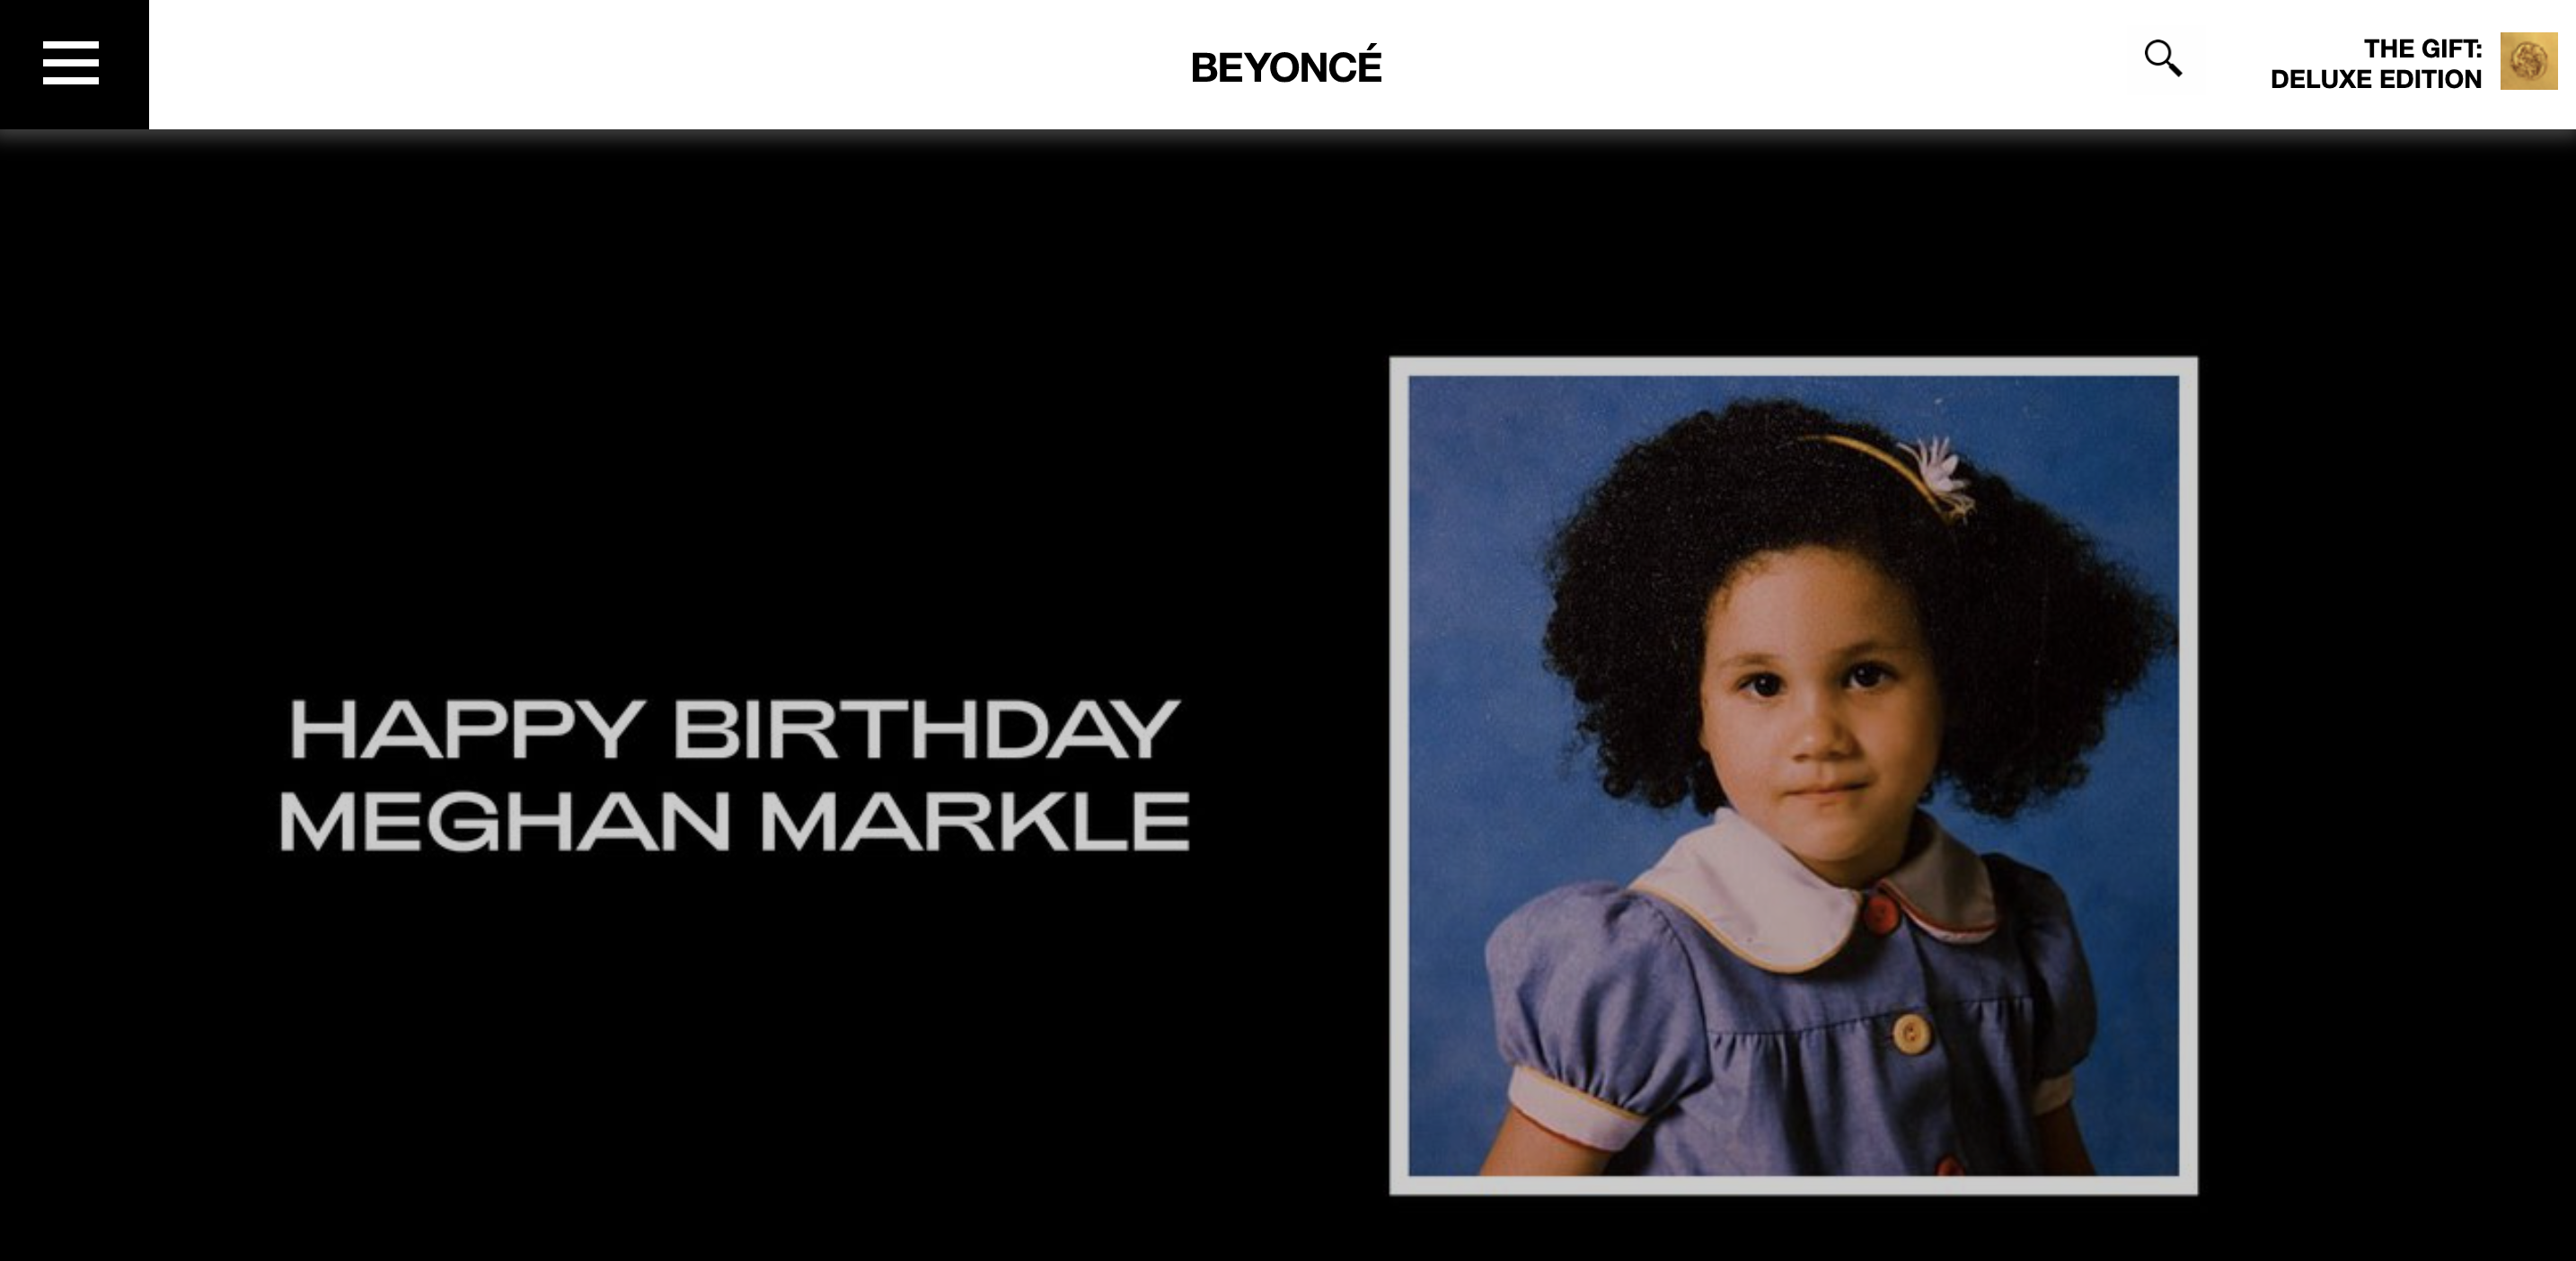 Beyonce's official website wished Meghan Markle a happy birthday